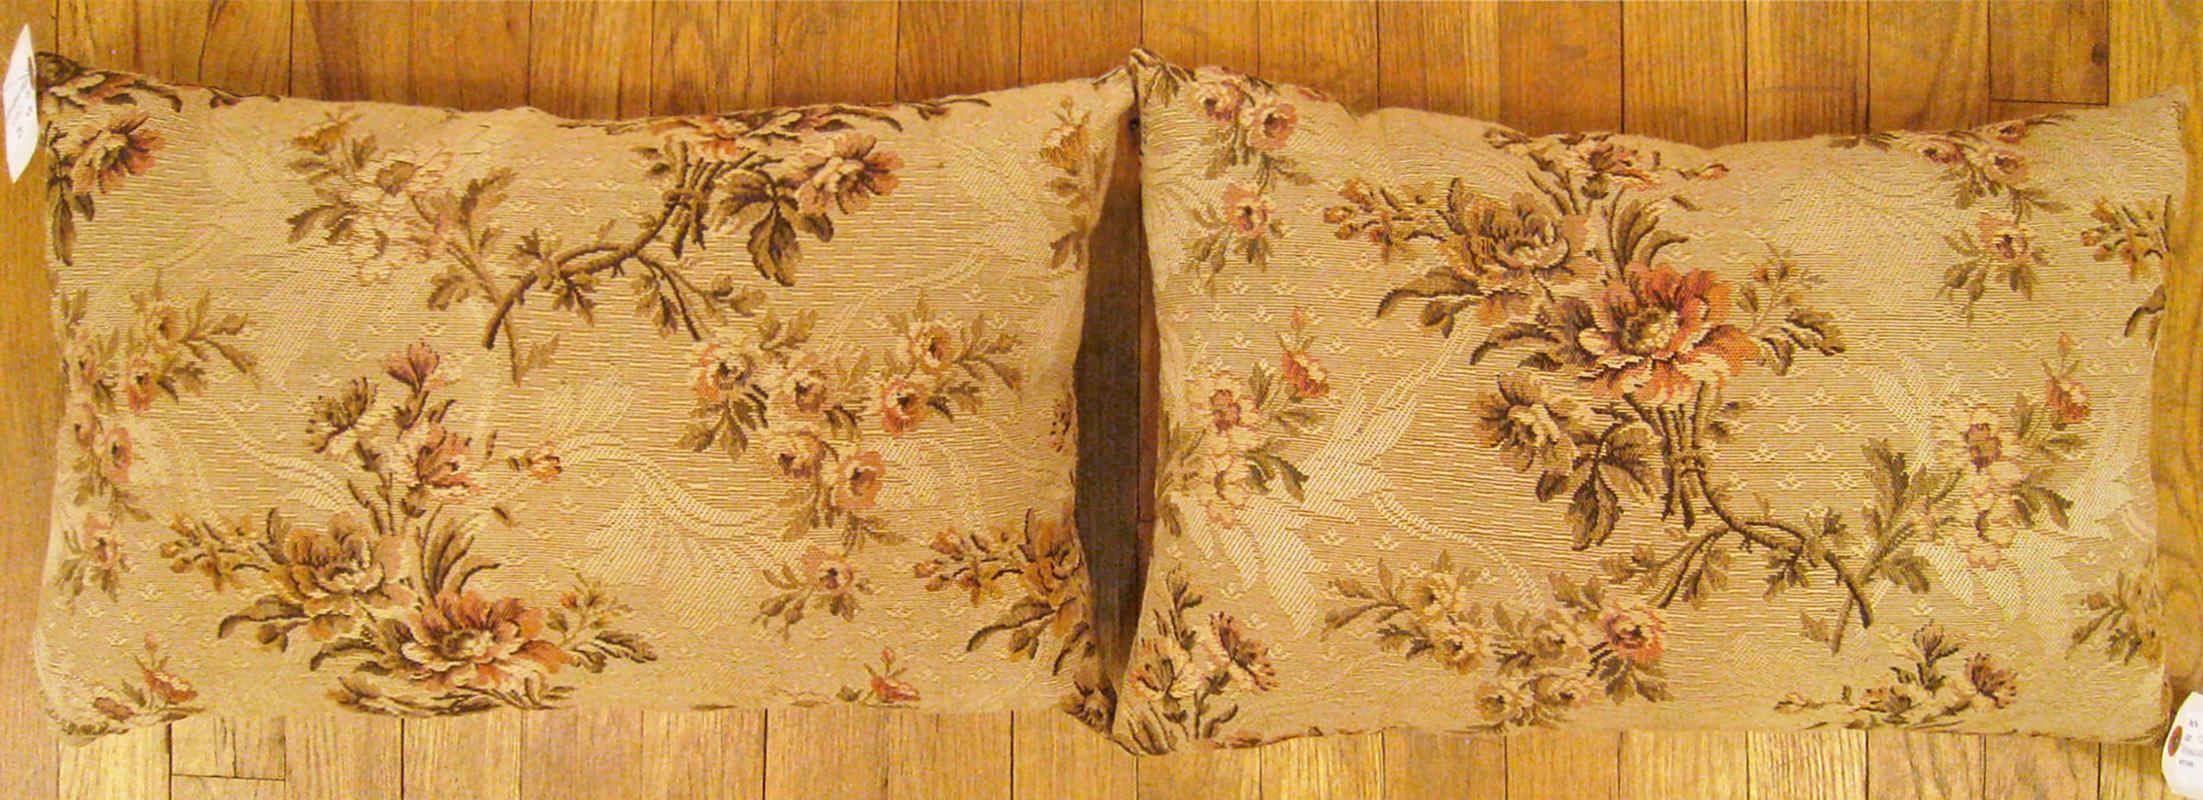 A pair of antique jacquard tapestry pillows ; size 1'2” x 1'9” each.

An antique decorative pillows with floral elements allover a dusty rose central field, size 1'2